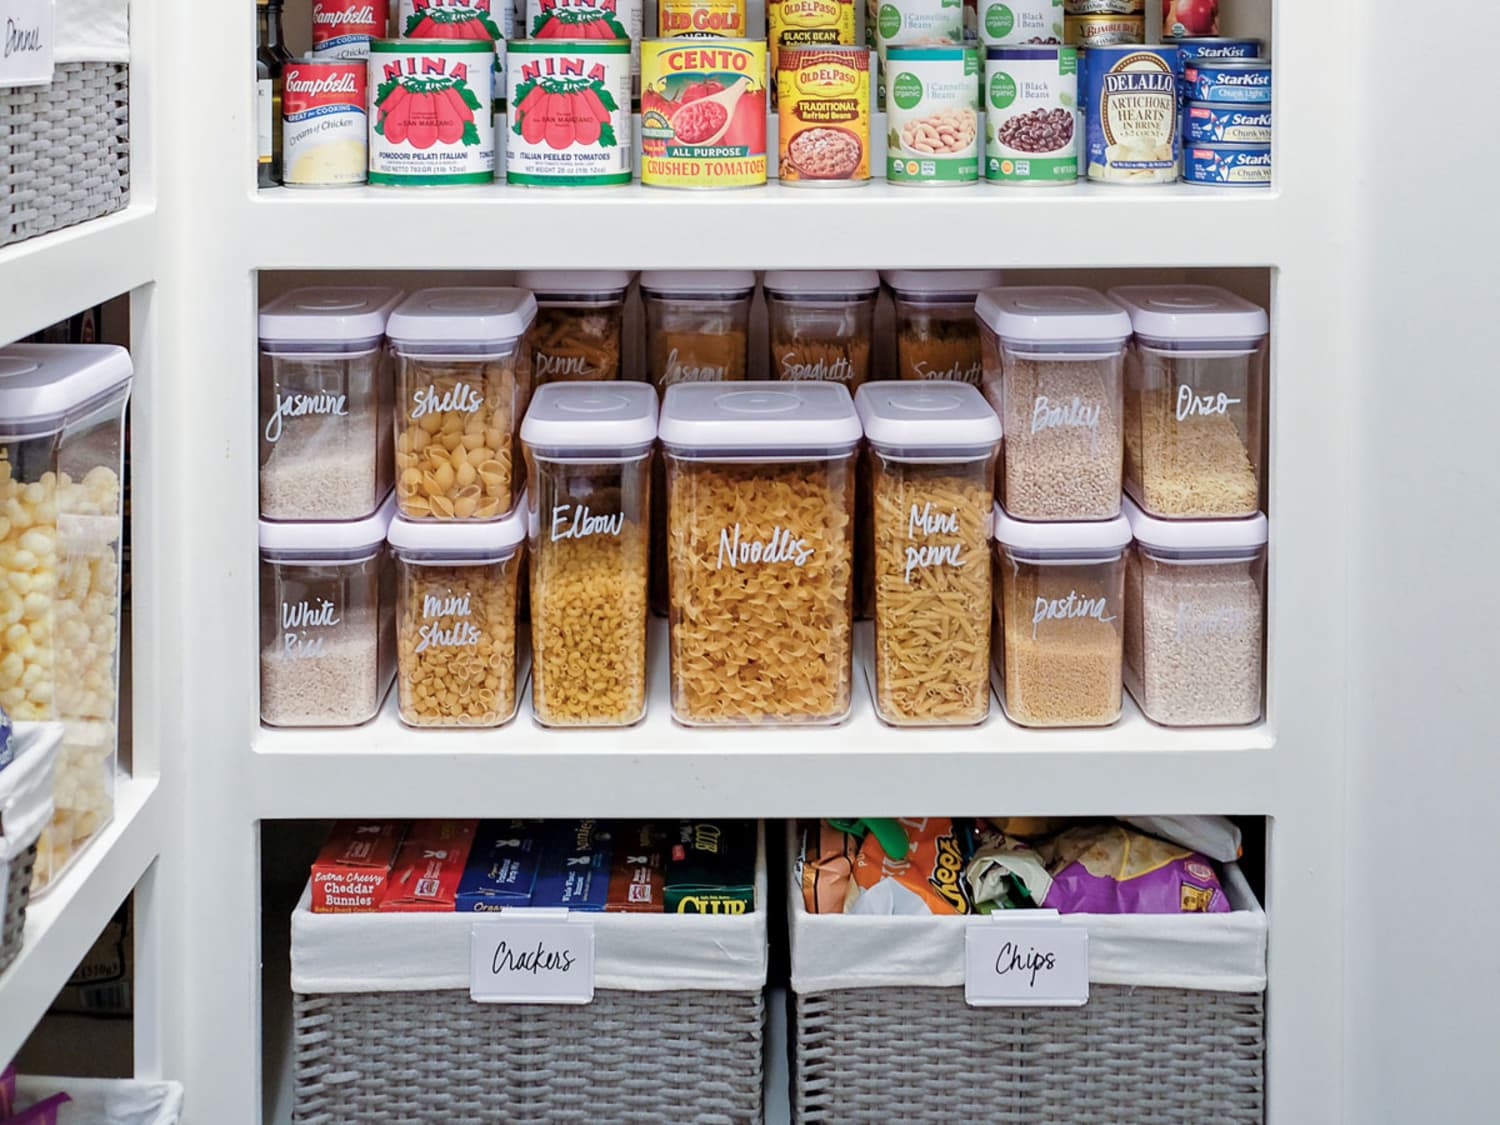 Pantry Organization Ideas for Spaces of Every Size